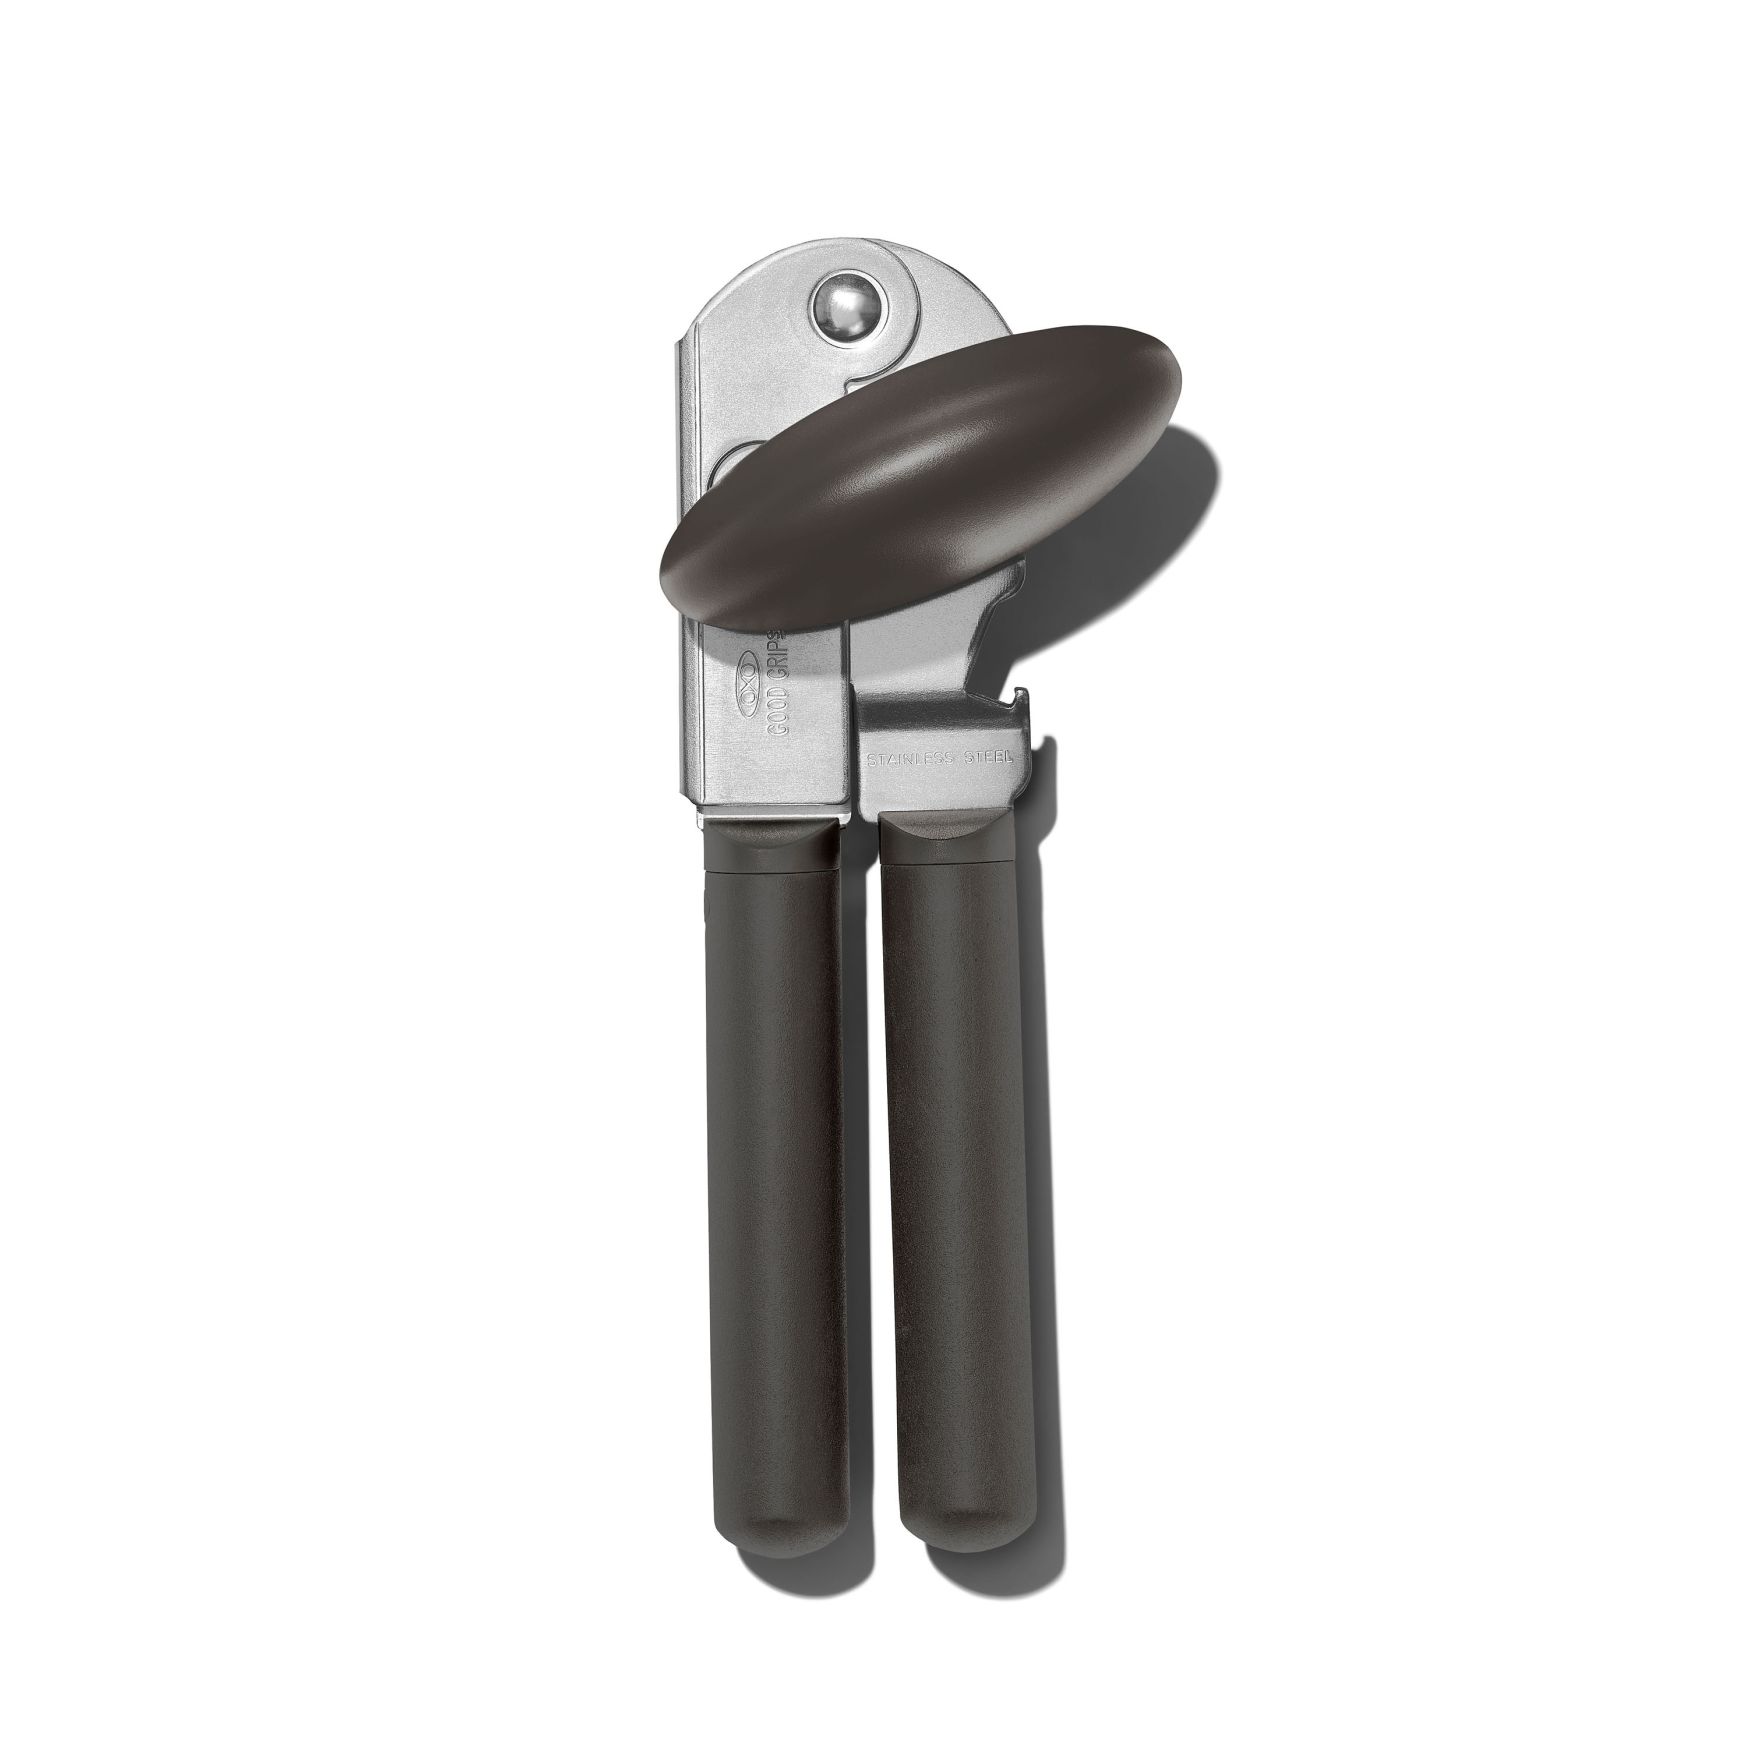 REI Co-op Members Only: OXO Outdoor Can + Bottle Opener $8.93 + Free Shipping